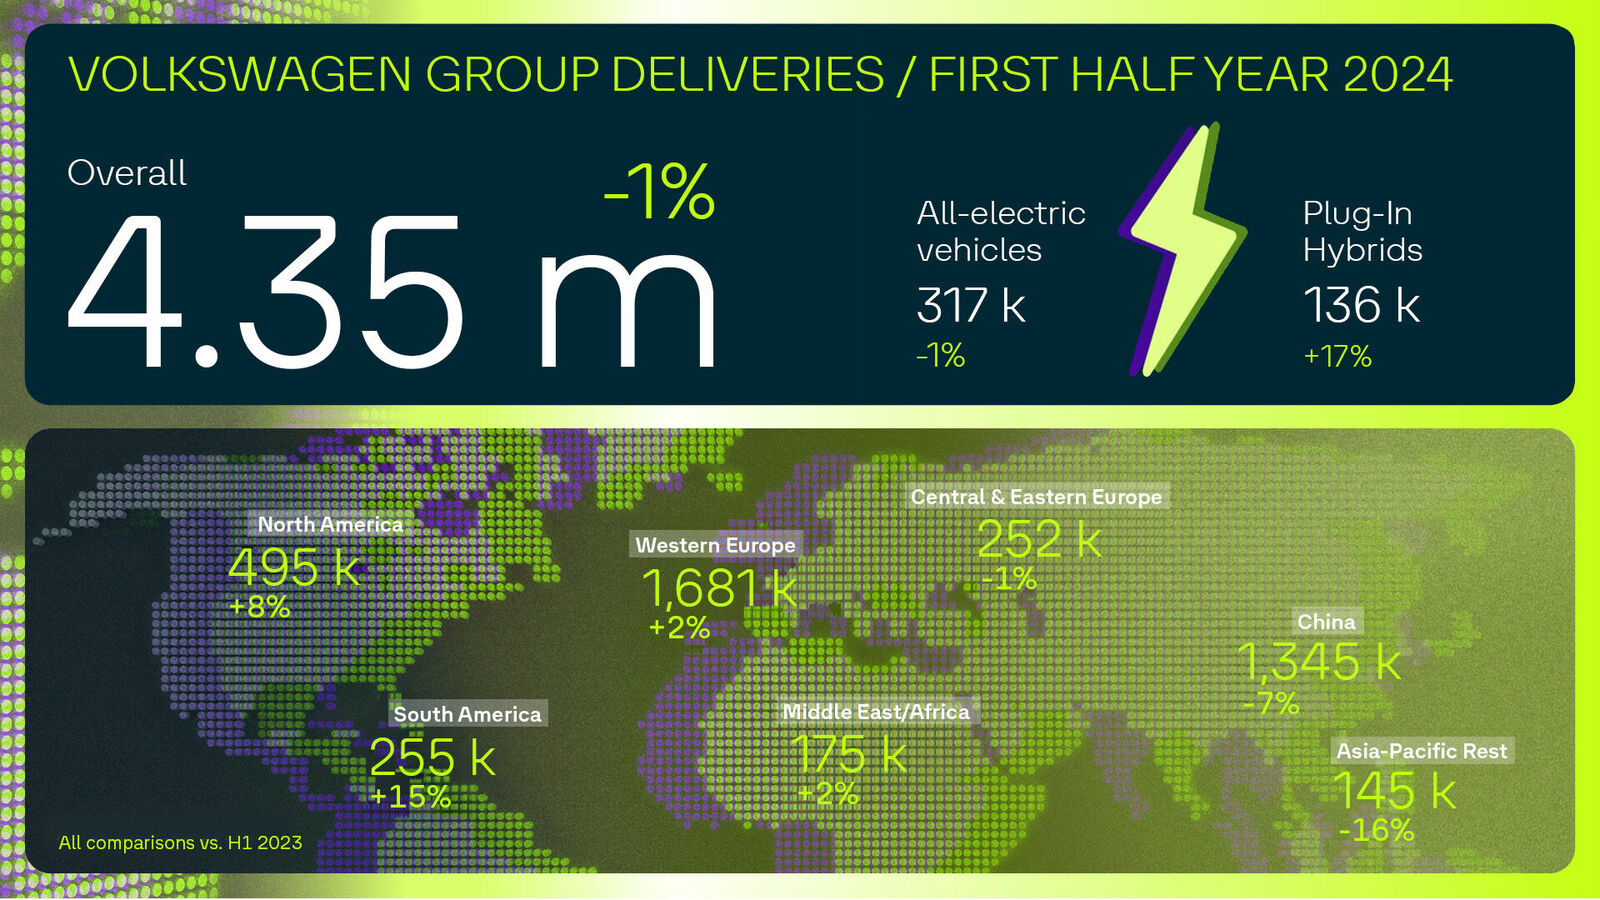 Infographic of Volkswagen Group deliveries in the first half of 2024, breakdown by regions and vehicle types.